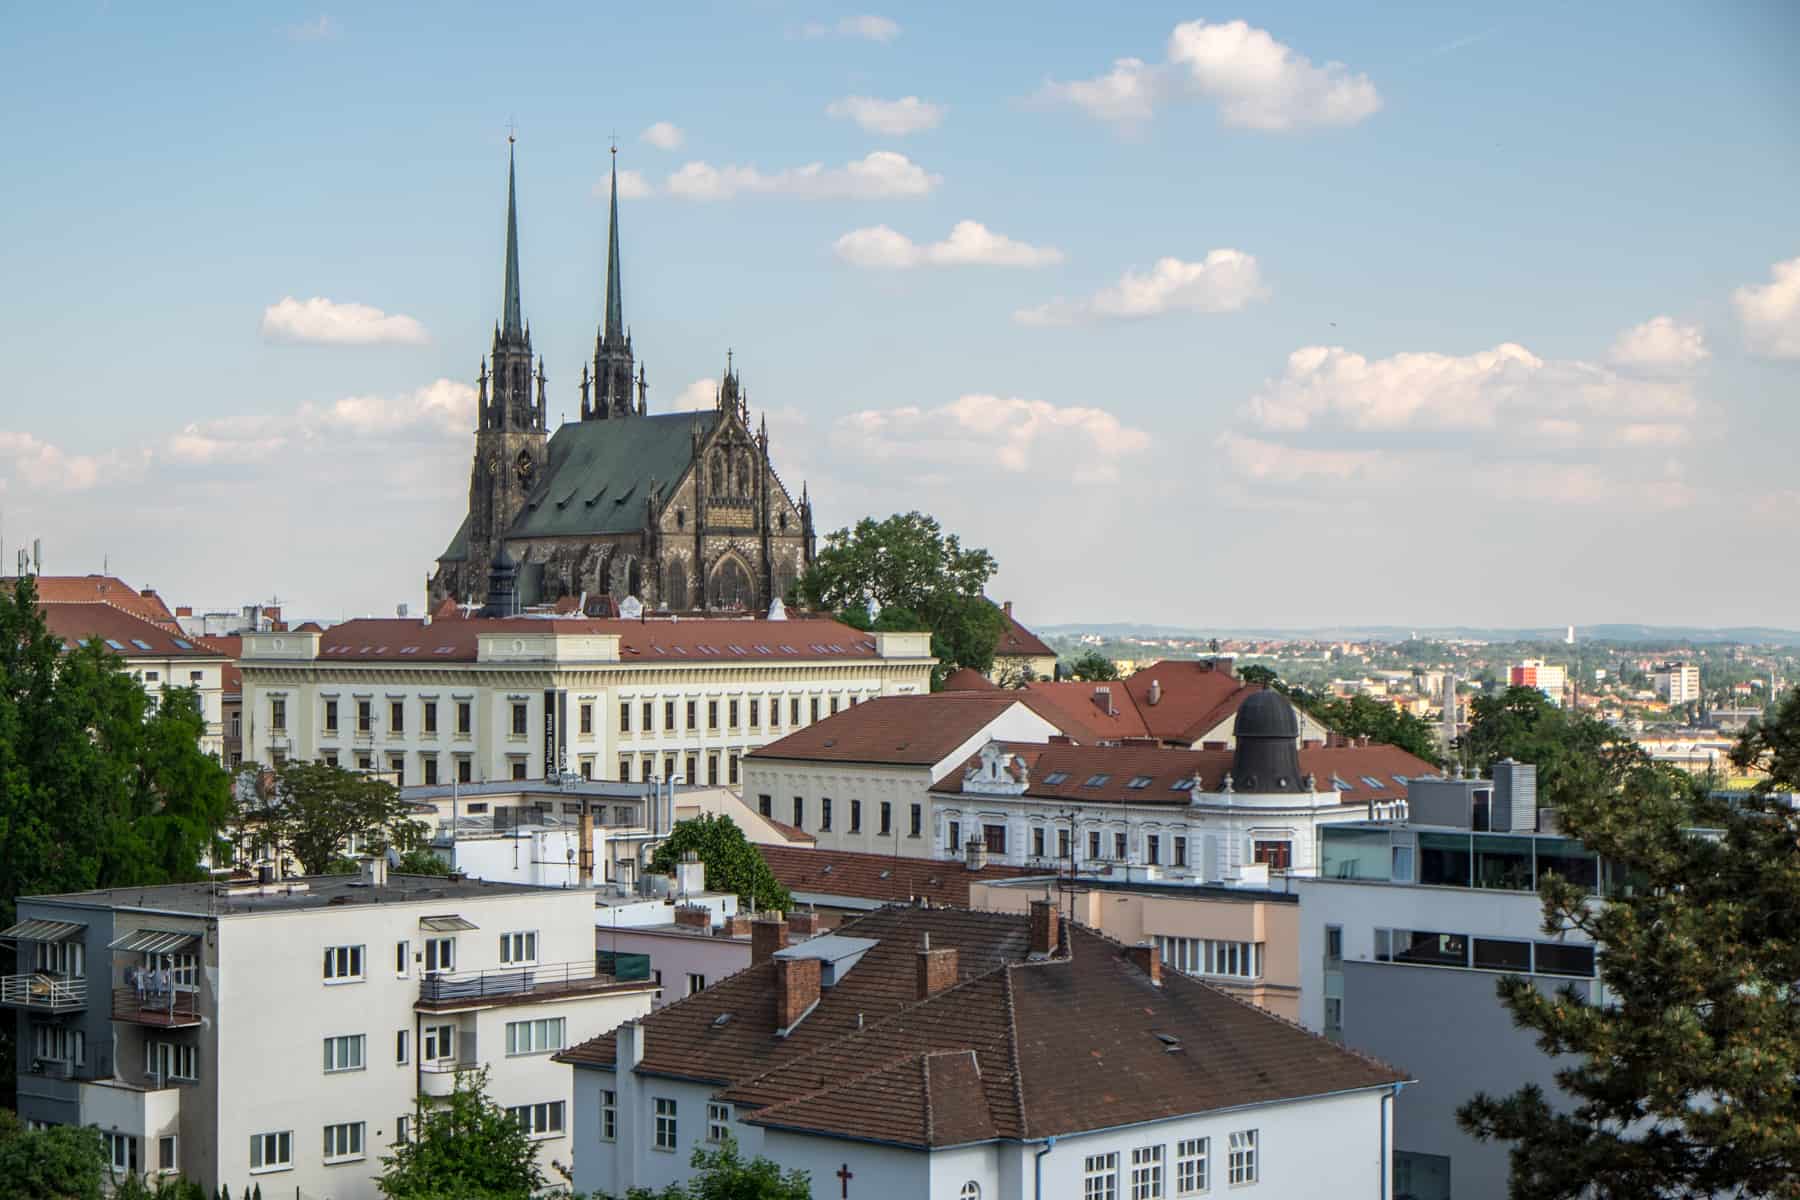 Elevated view of Brno city with red roofed buildings and a hilltop church.